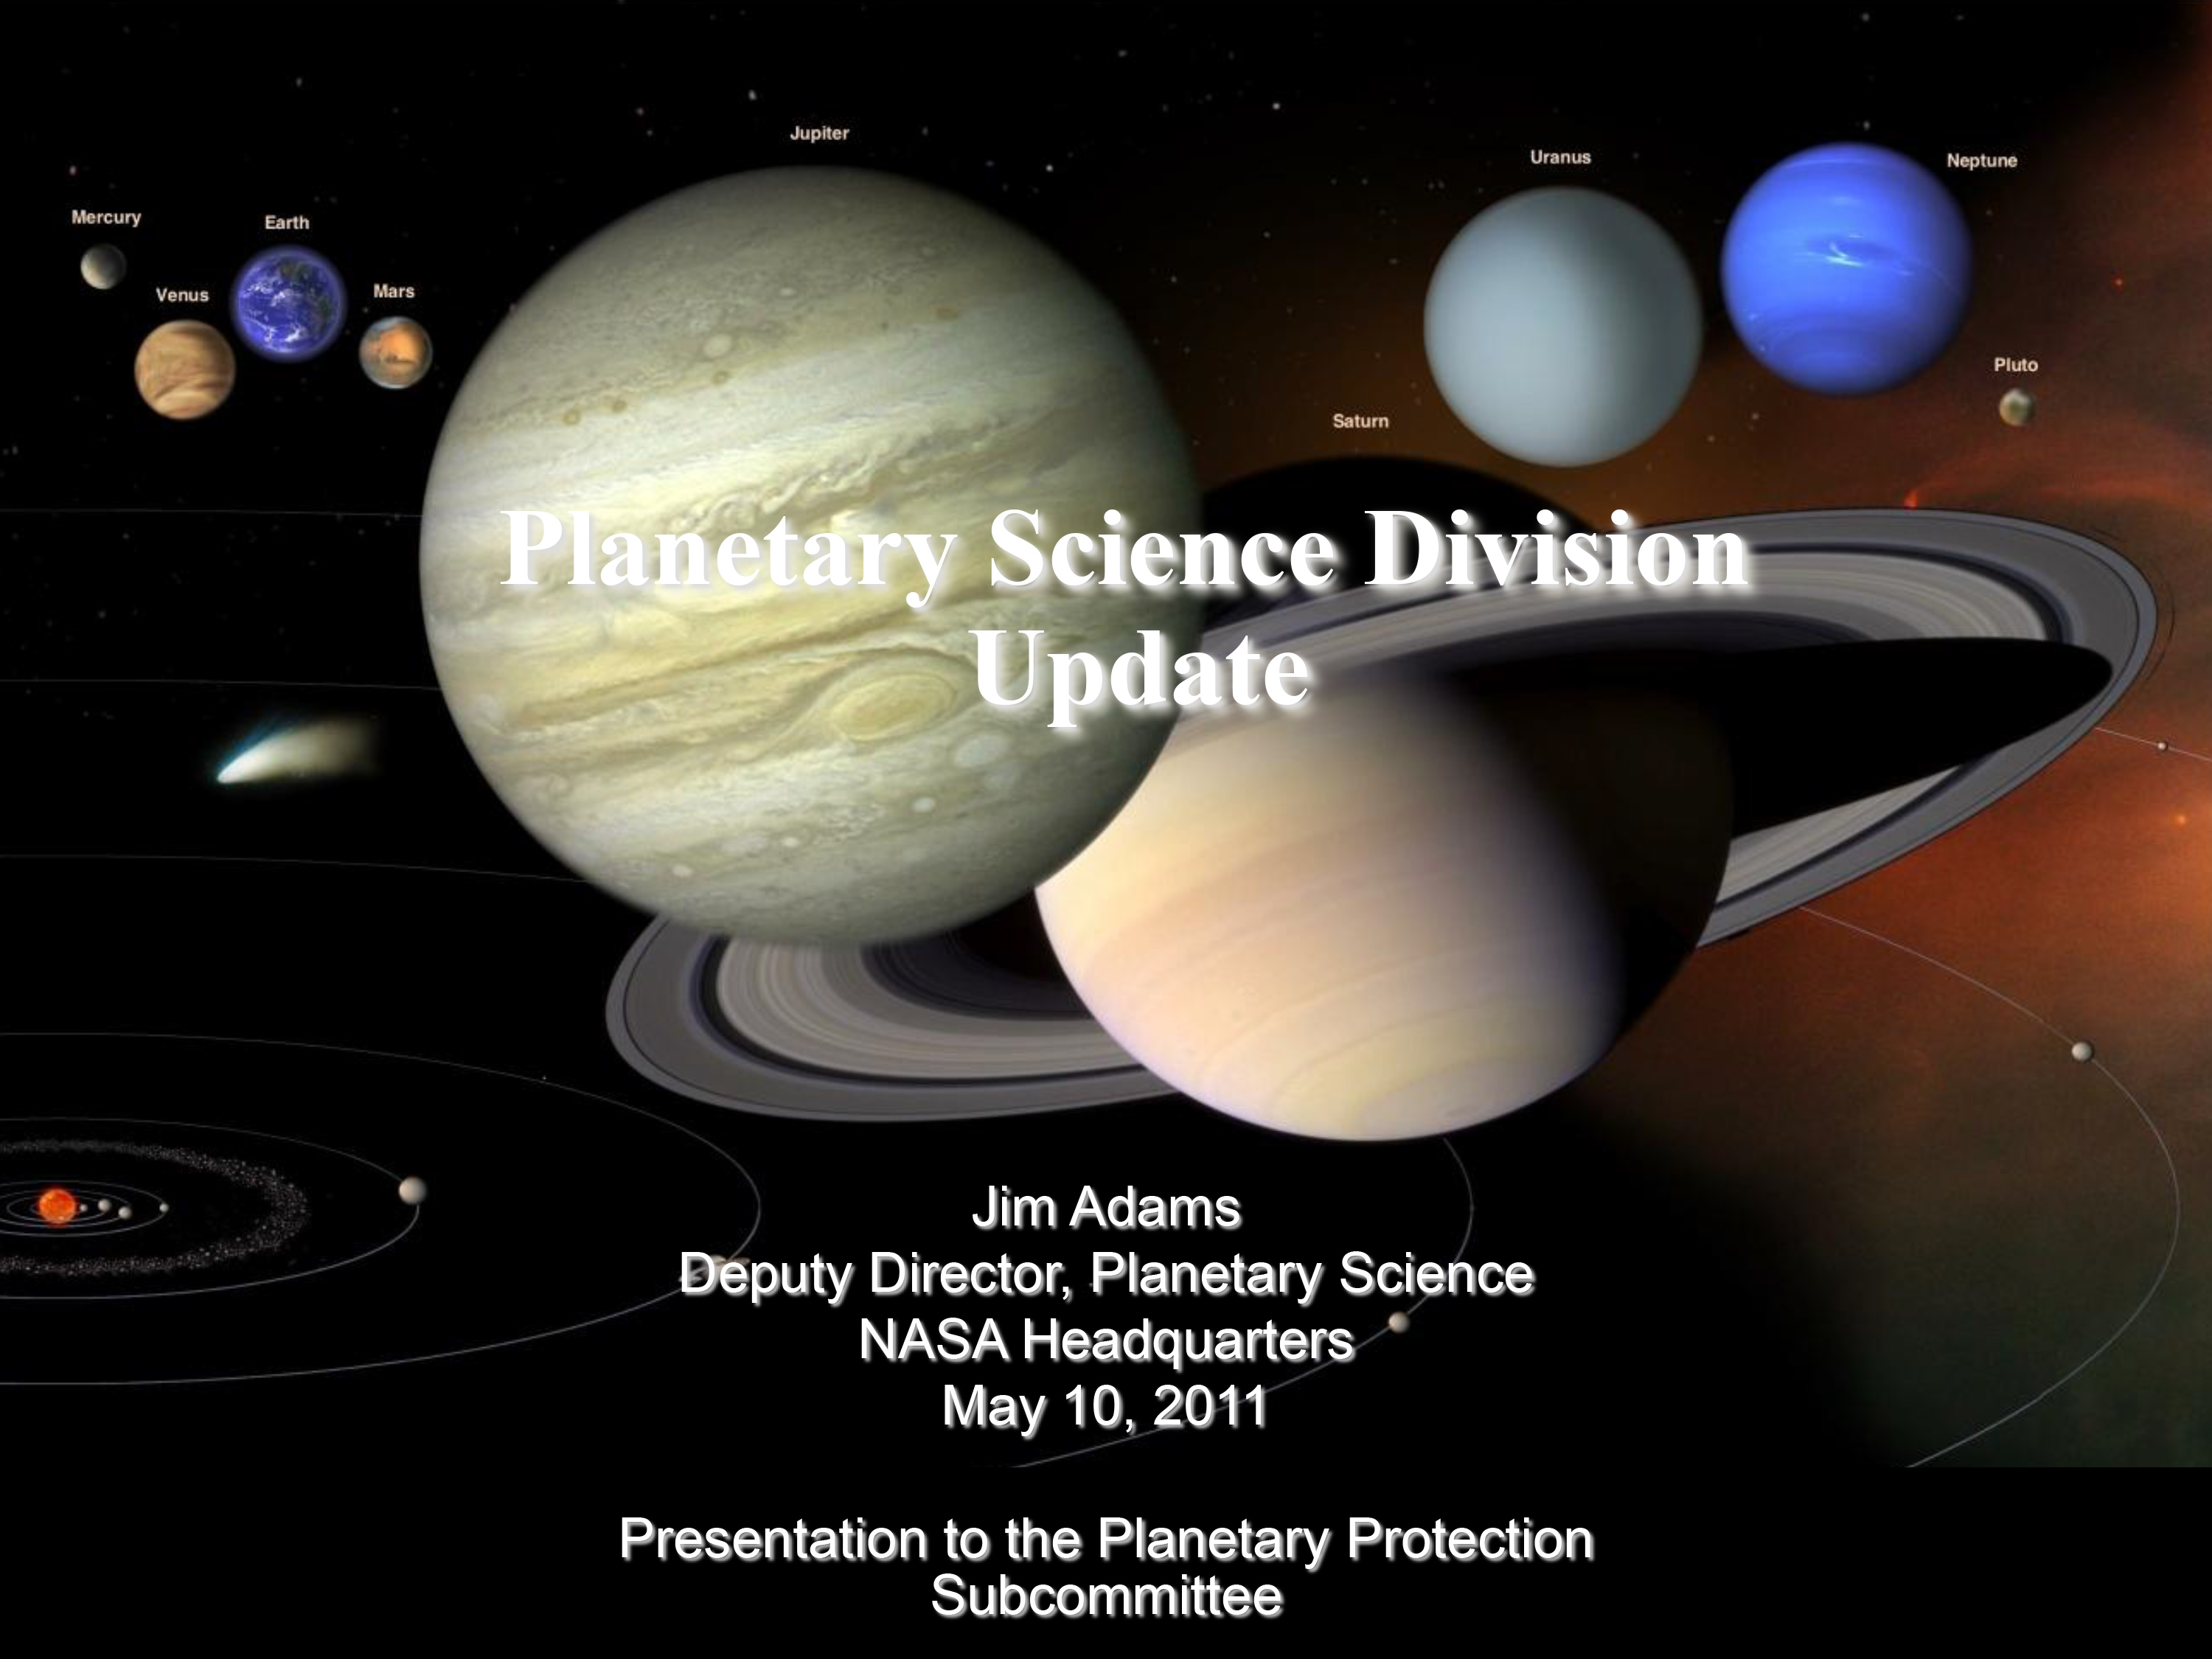 Presentation by Planetary Science Division Deputy Director Jim Adams to Planetary Protection Subcommittee